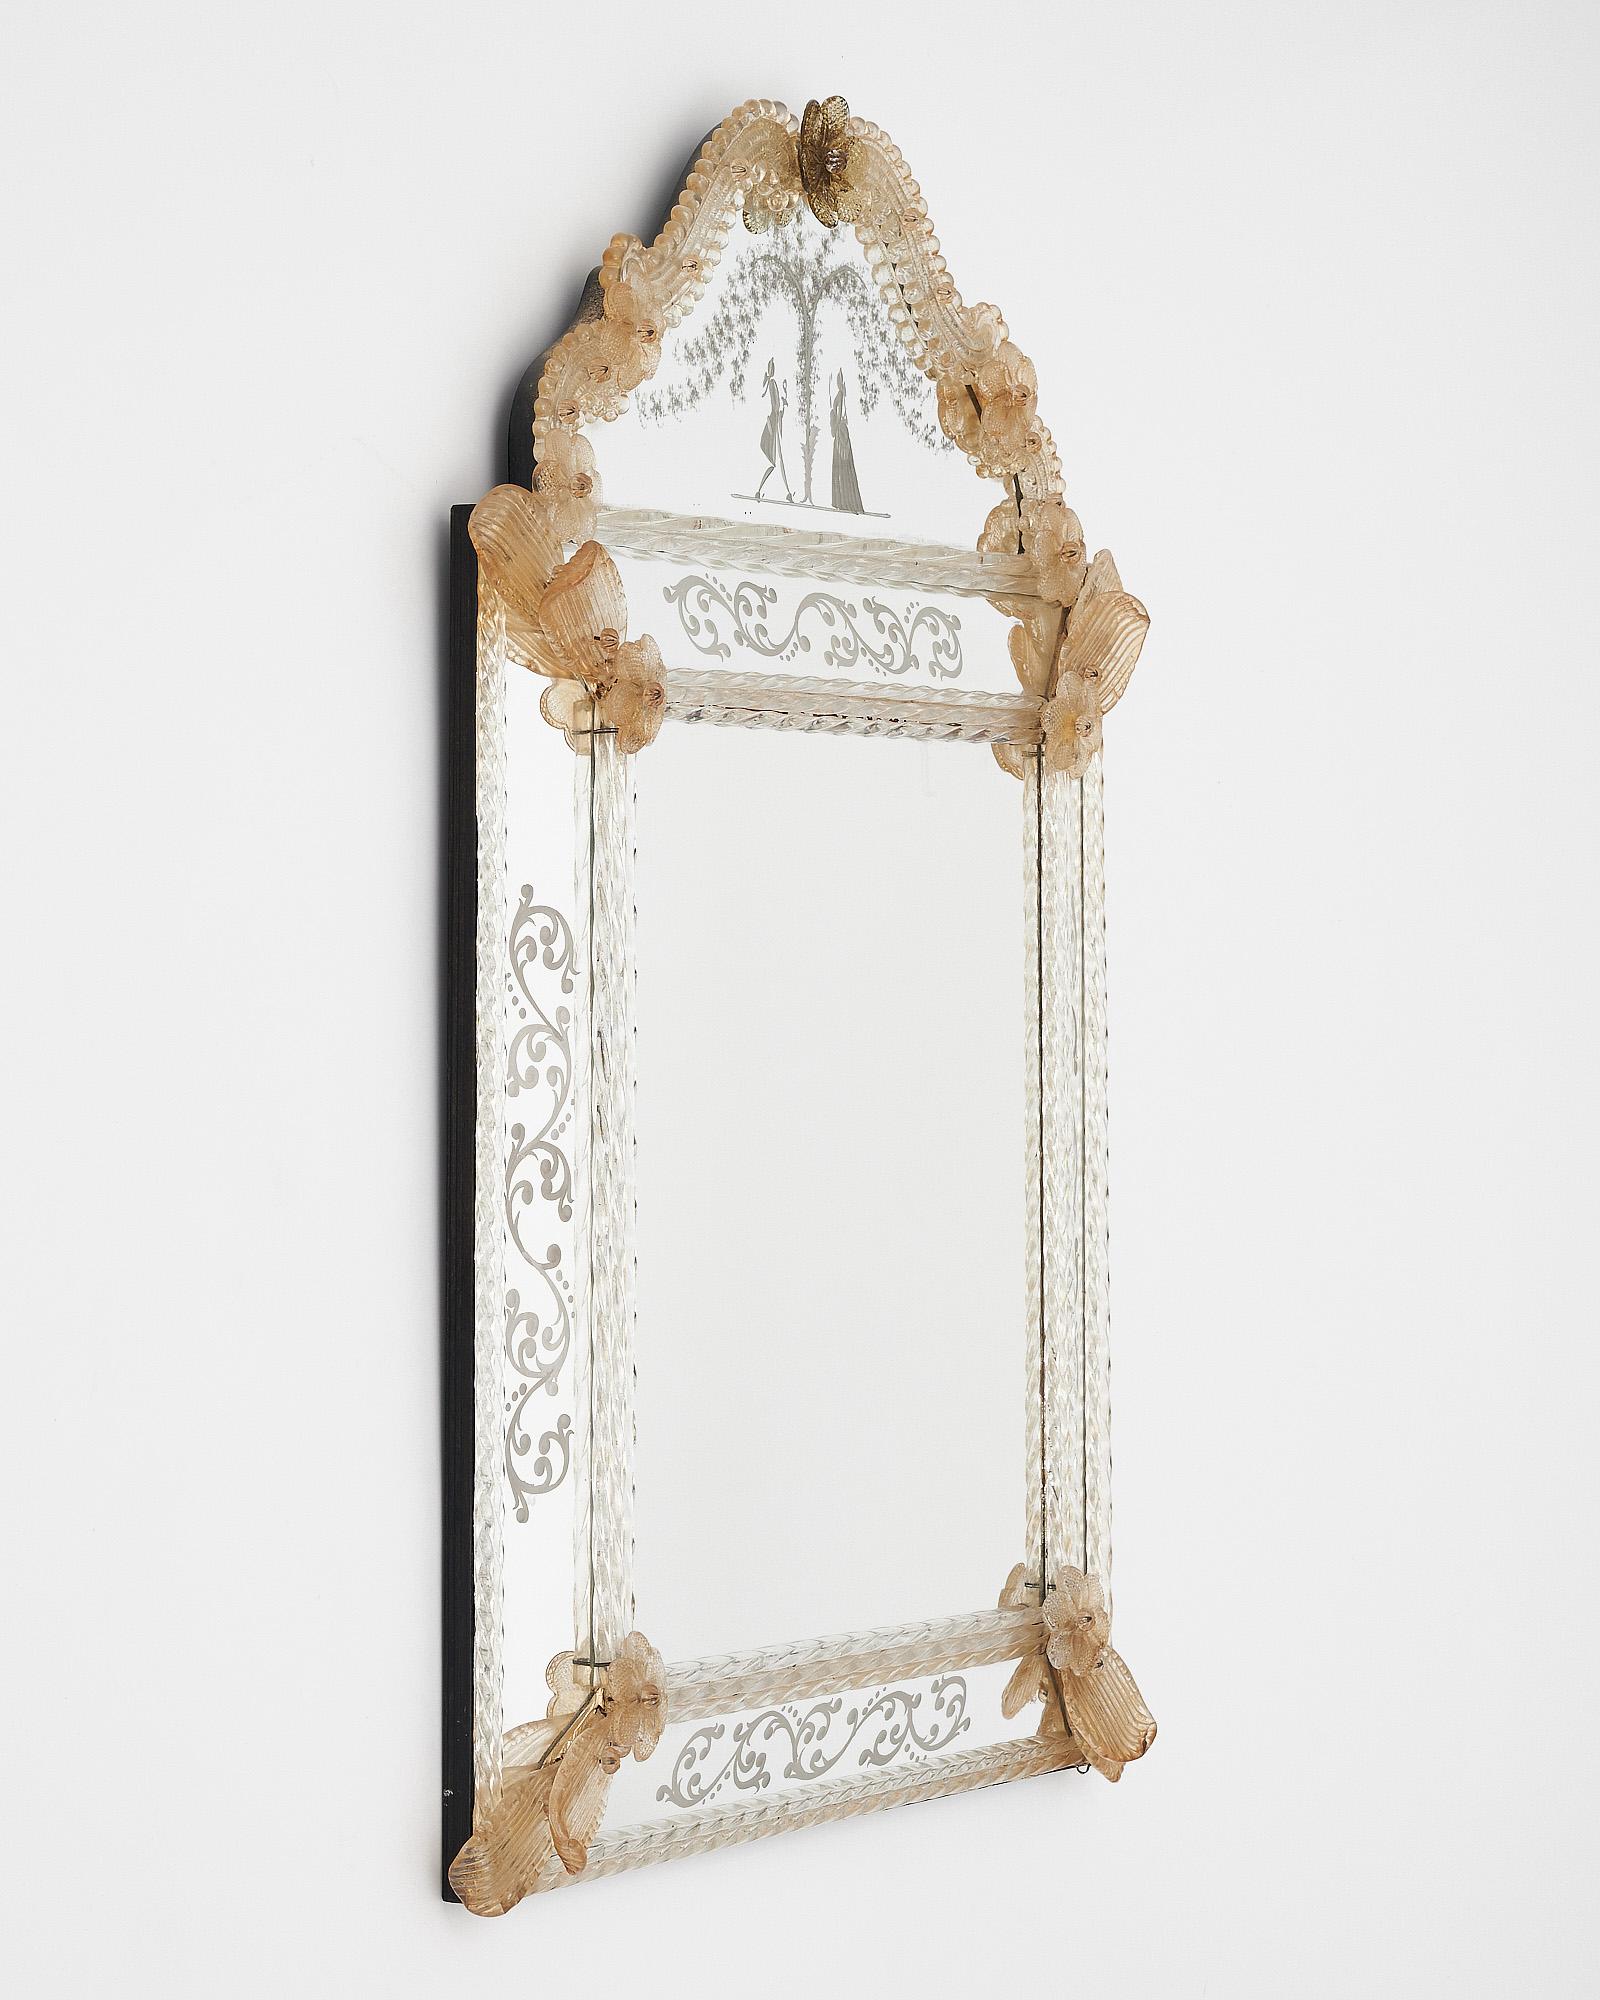 Venetian wall mirror featuring a central rectangular mirror with fronton, floral motifs, and torsadoes. Floral friezes frame the mirror and the fronton shows an engraved romantic scene. This piece is in beautiful condition.
